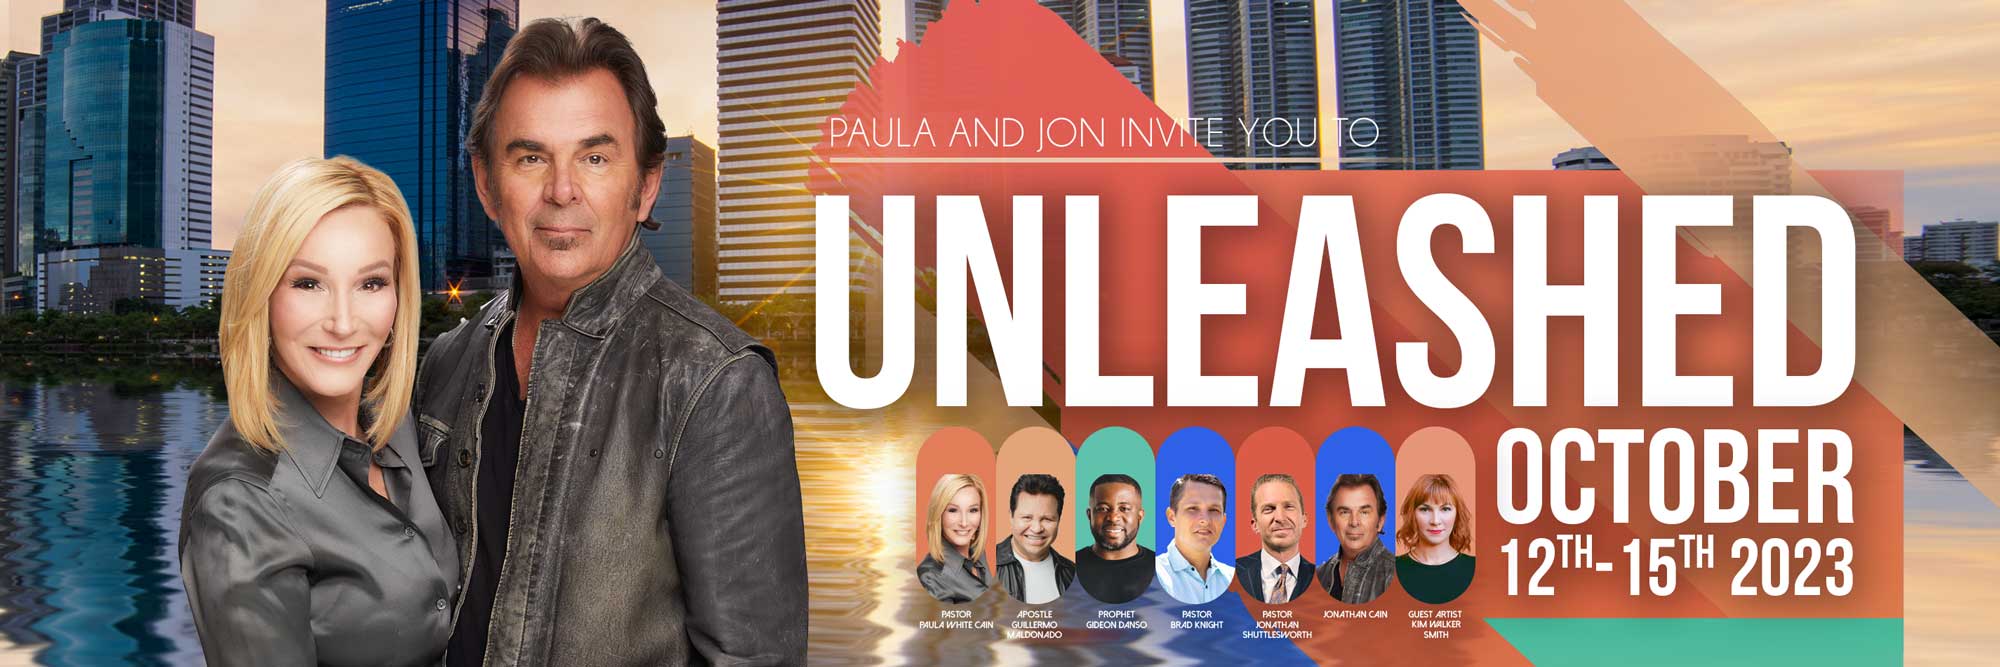 LET ME KNOW YOU ARE COMING TO THE UNLEASHED CONFERENCE OCT 12-15  Parents: We have an incredible Children's Conference planned…